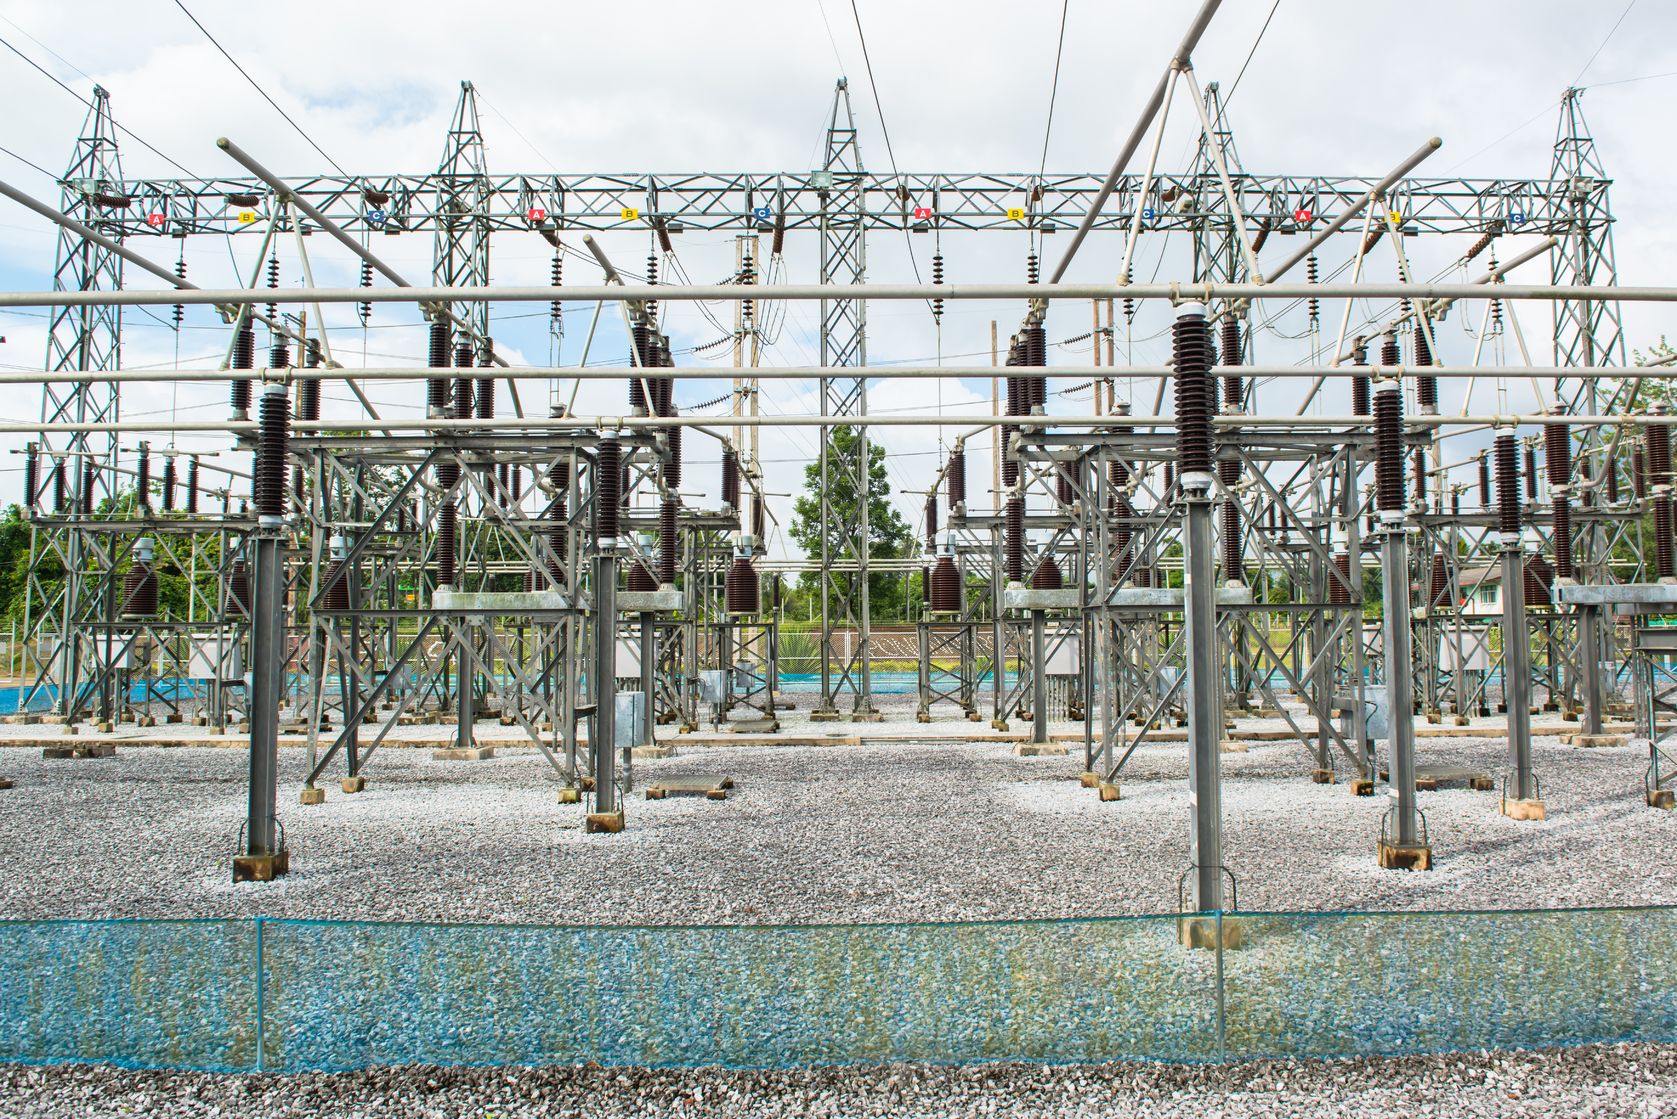 Making Power And Utilities Companies Resilient In A Changing Risk Landscape.